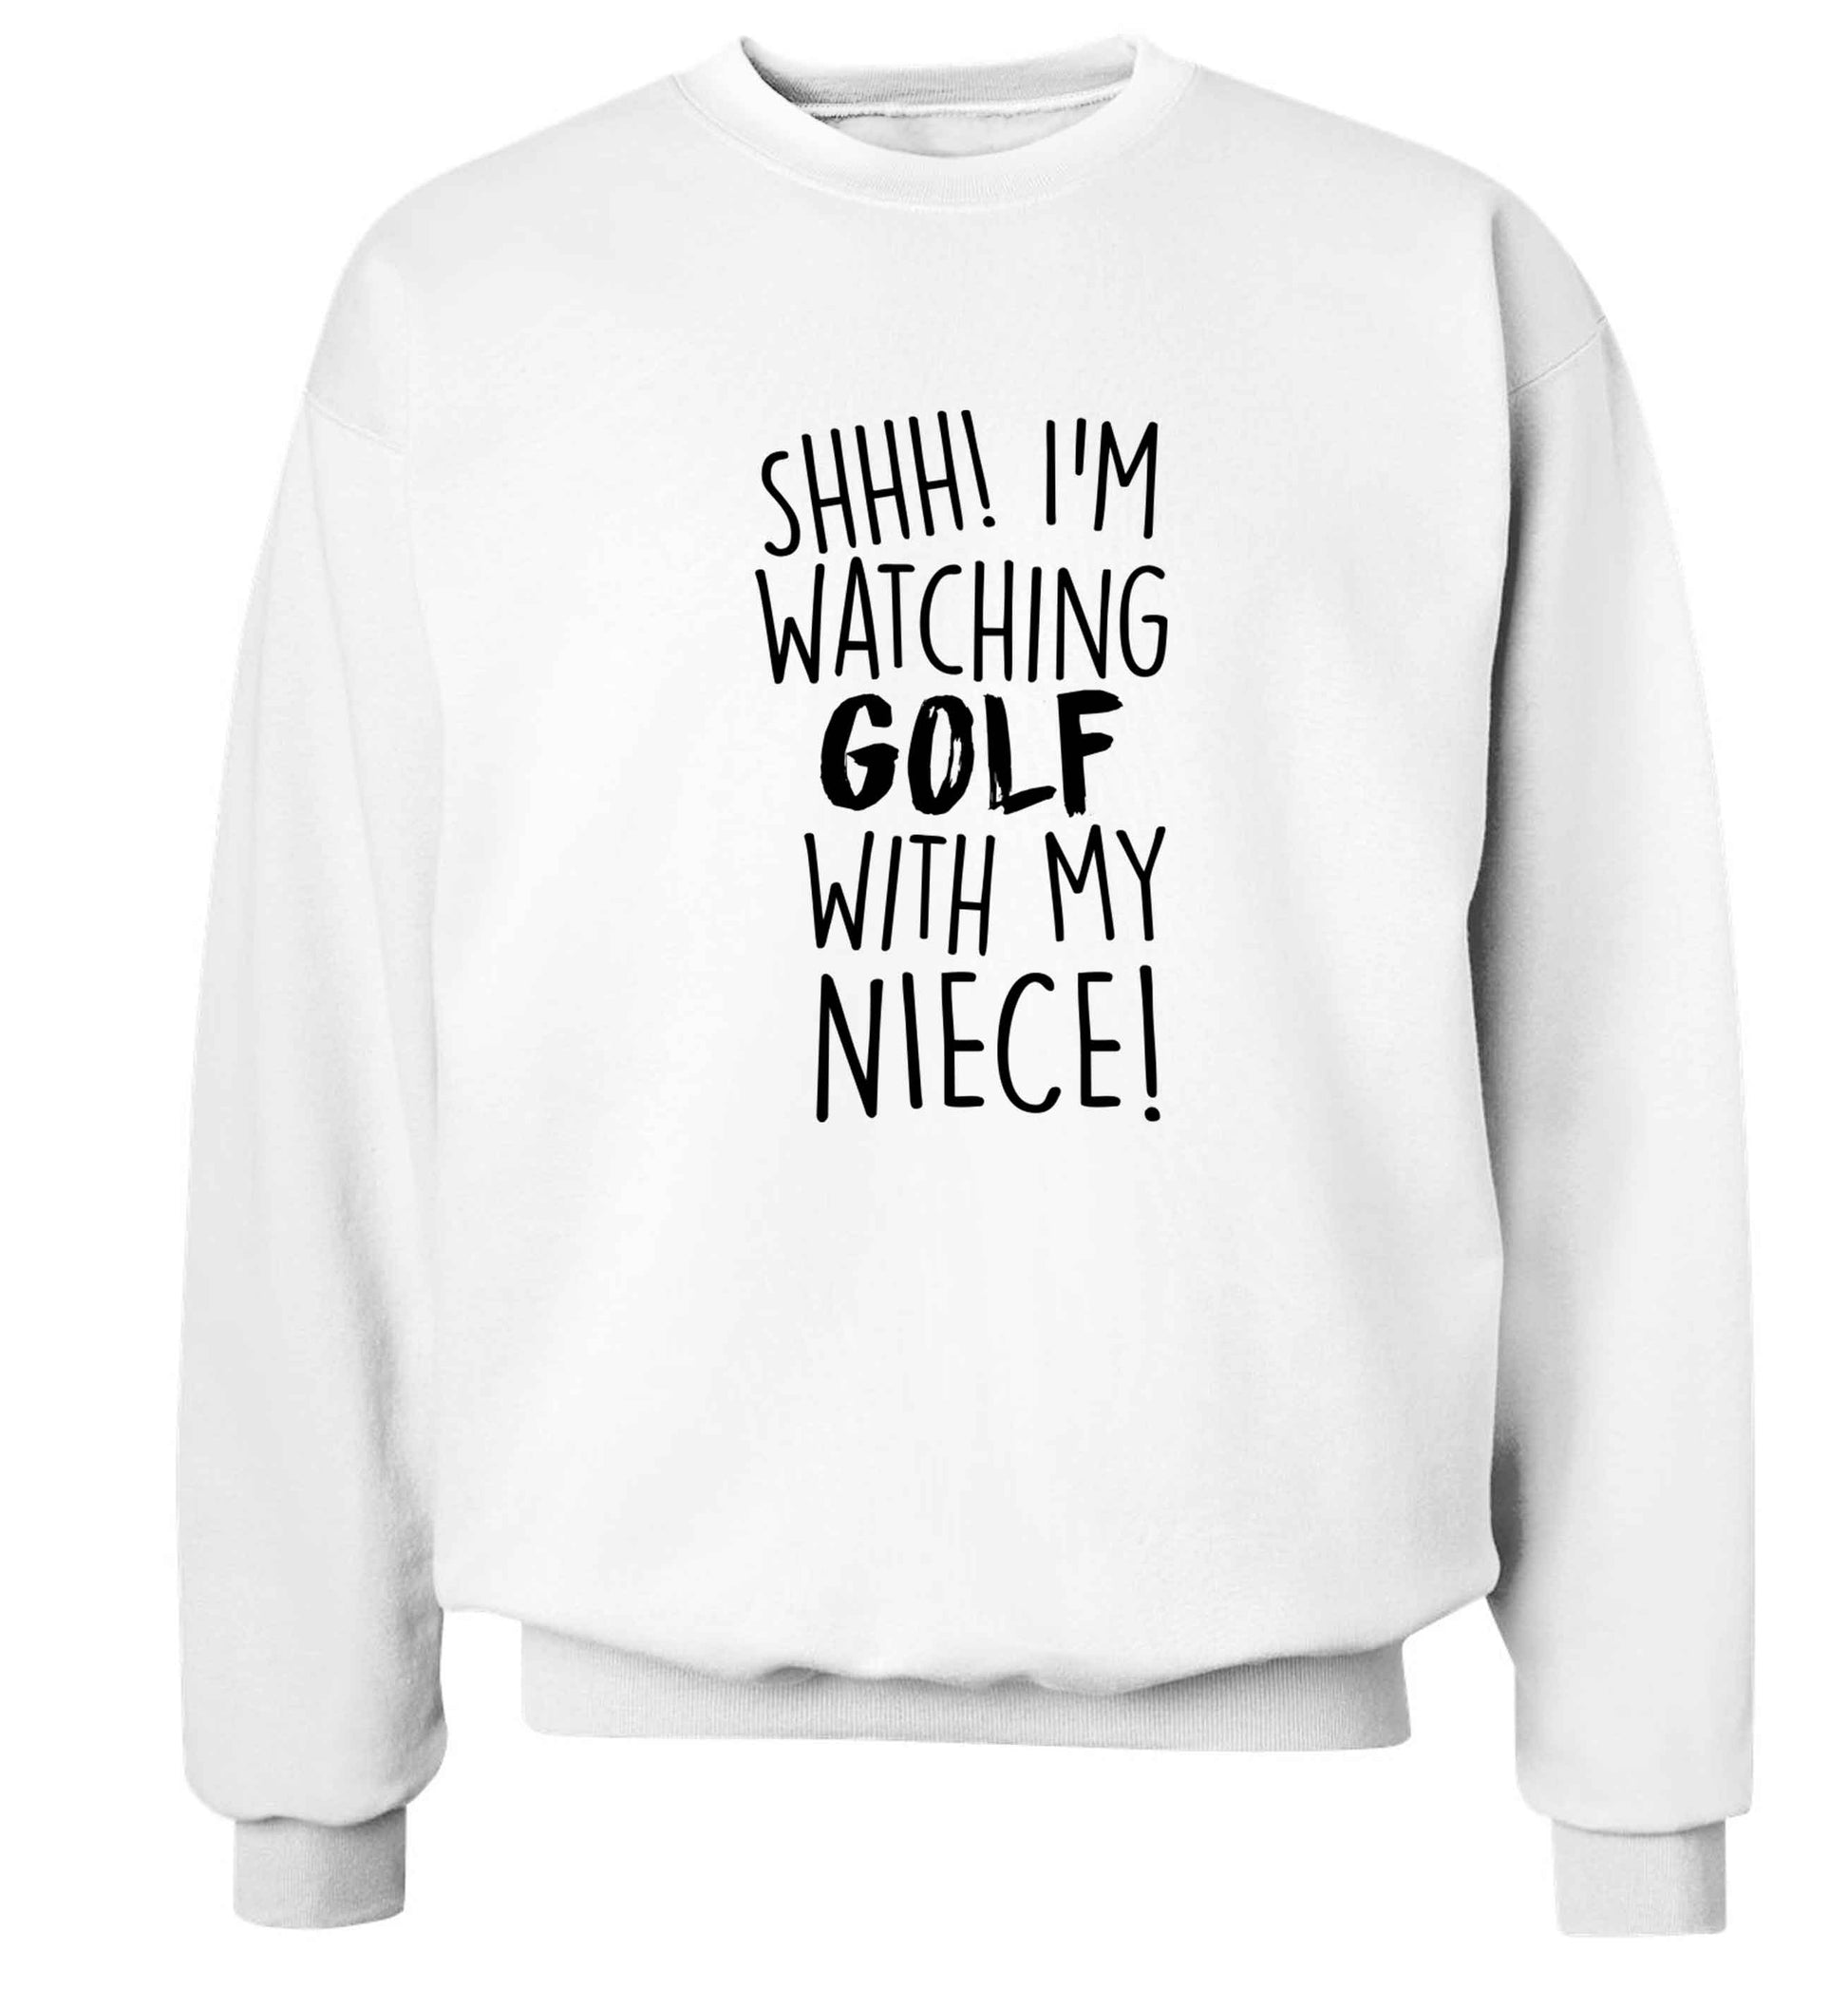 Shh I'm watching golf with my niece Adult's unisex white Sweater 2XL